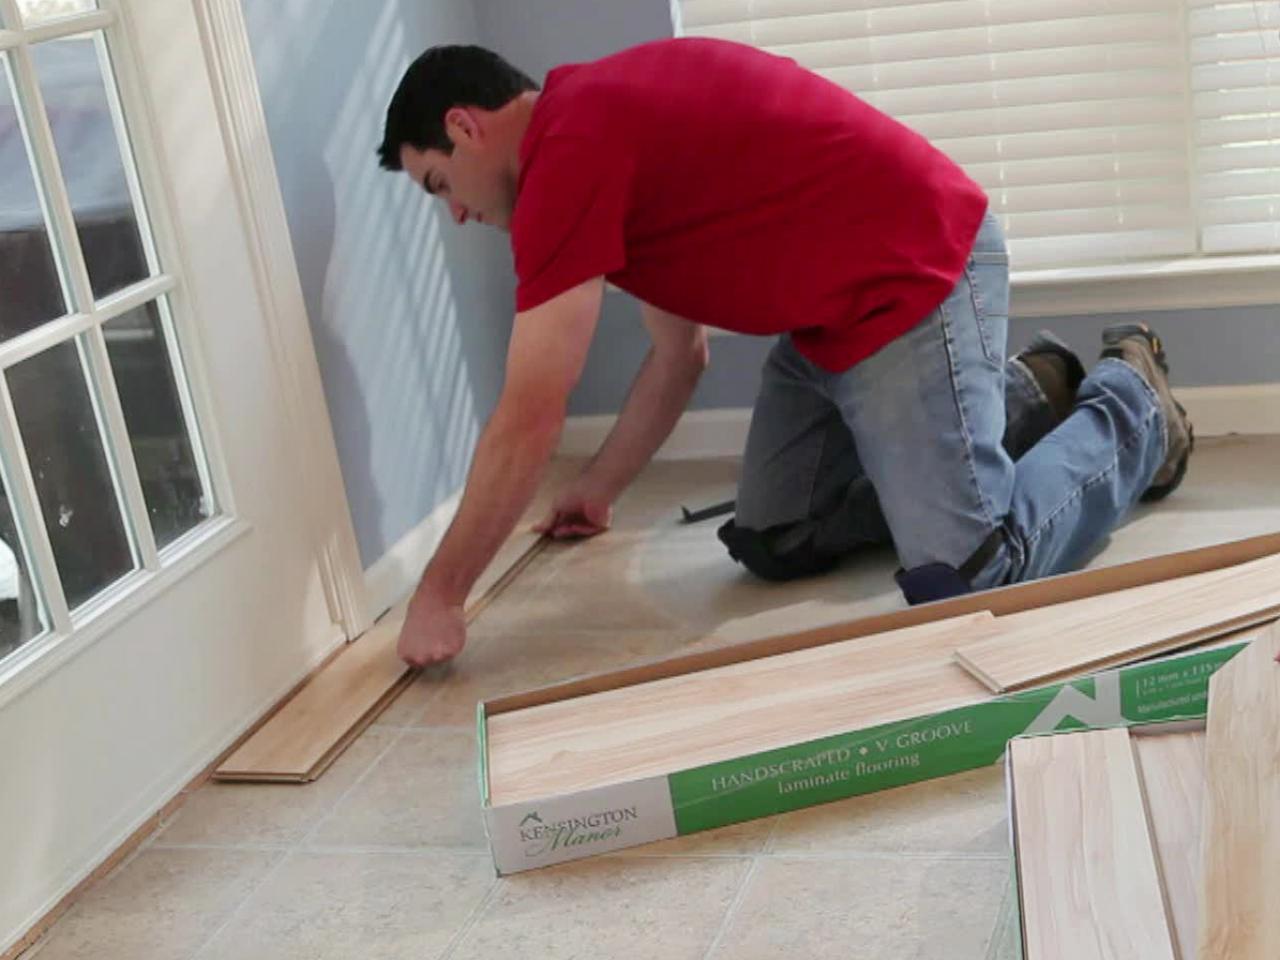 Installing Laminate Flooring How Tos, How To Lay Laminate Flooring Yourself